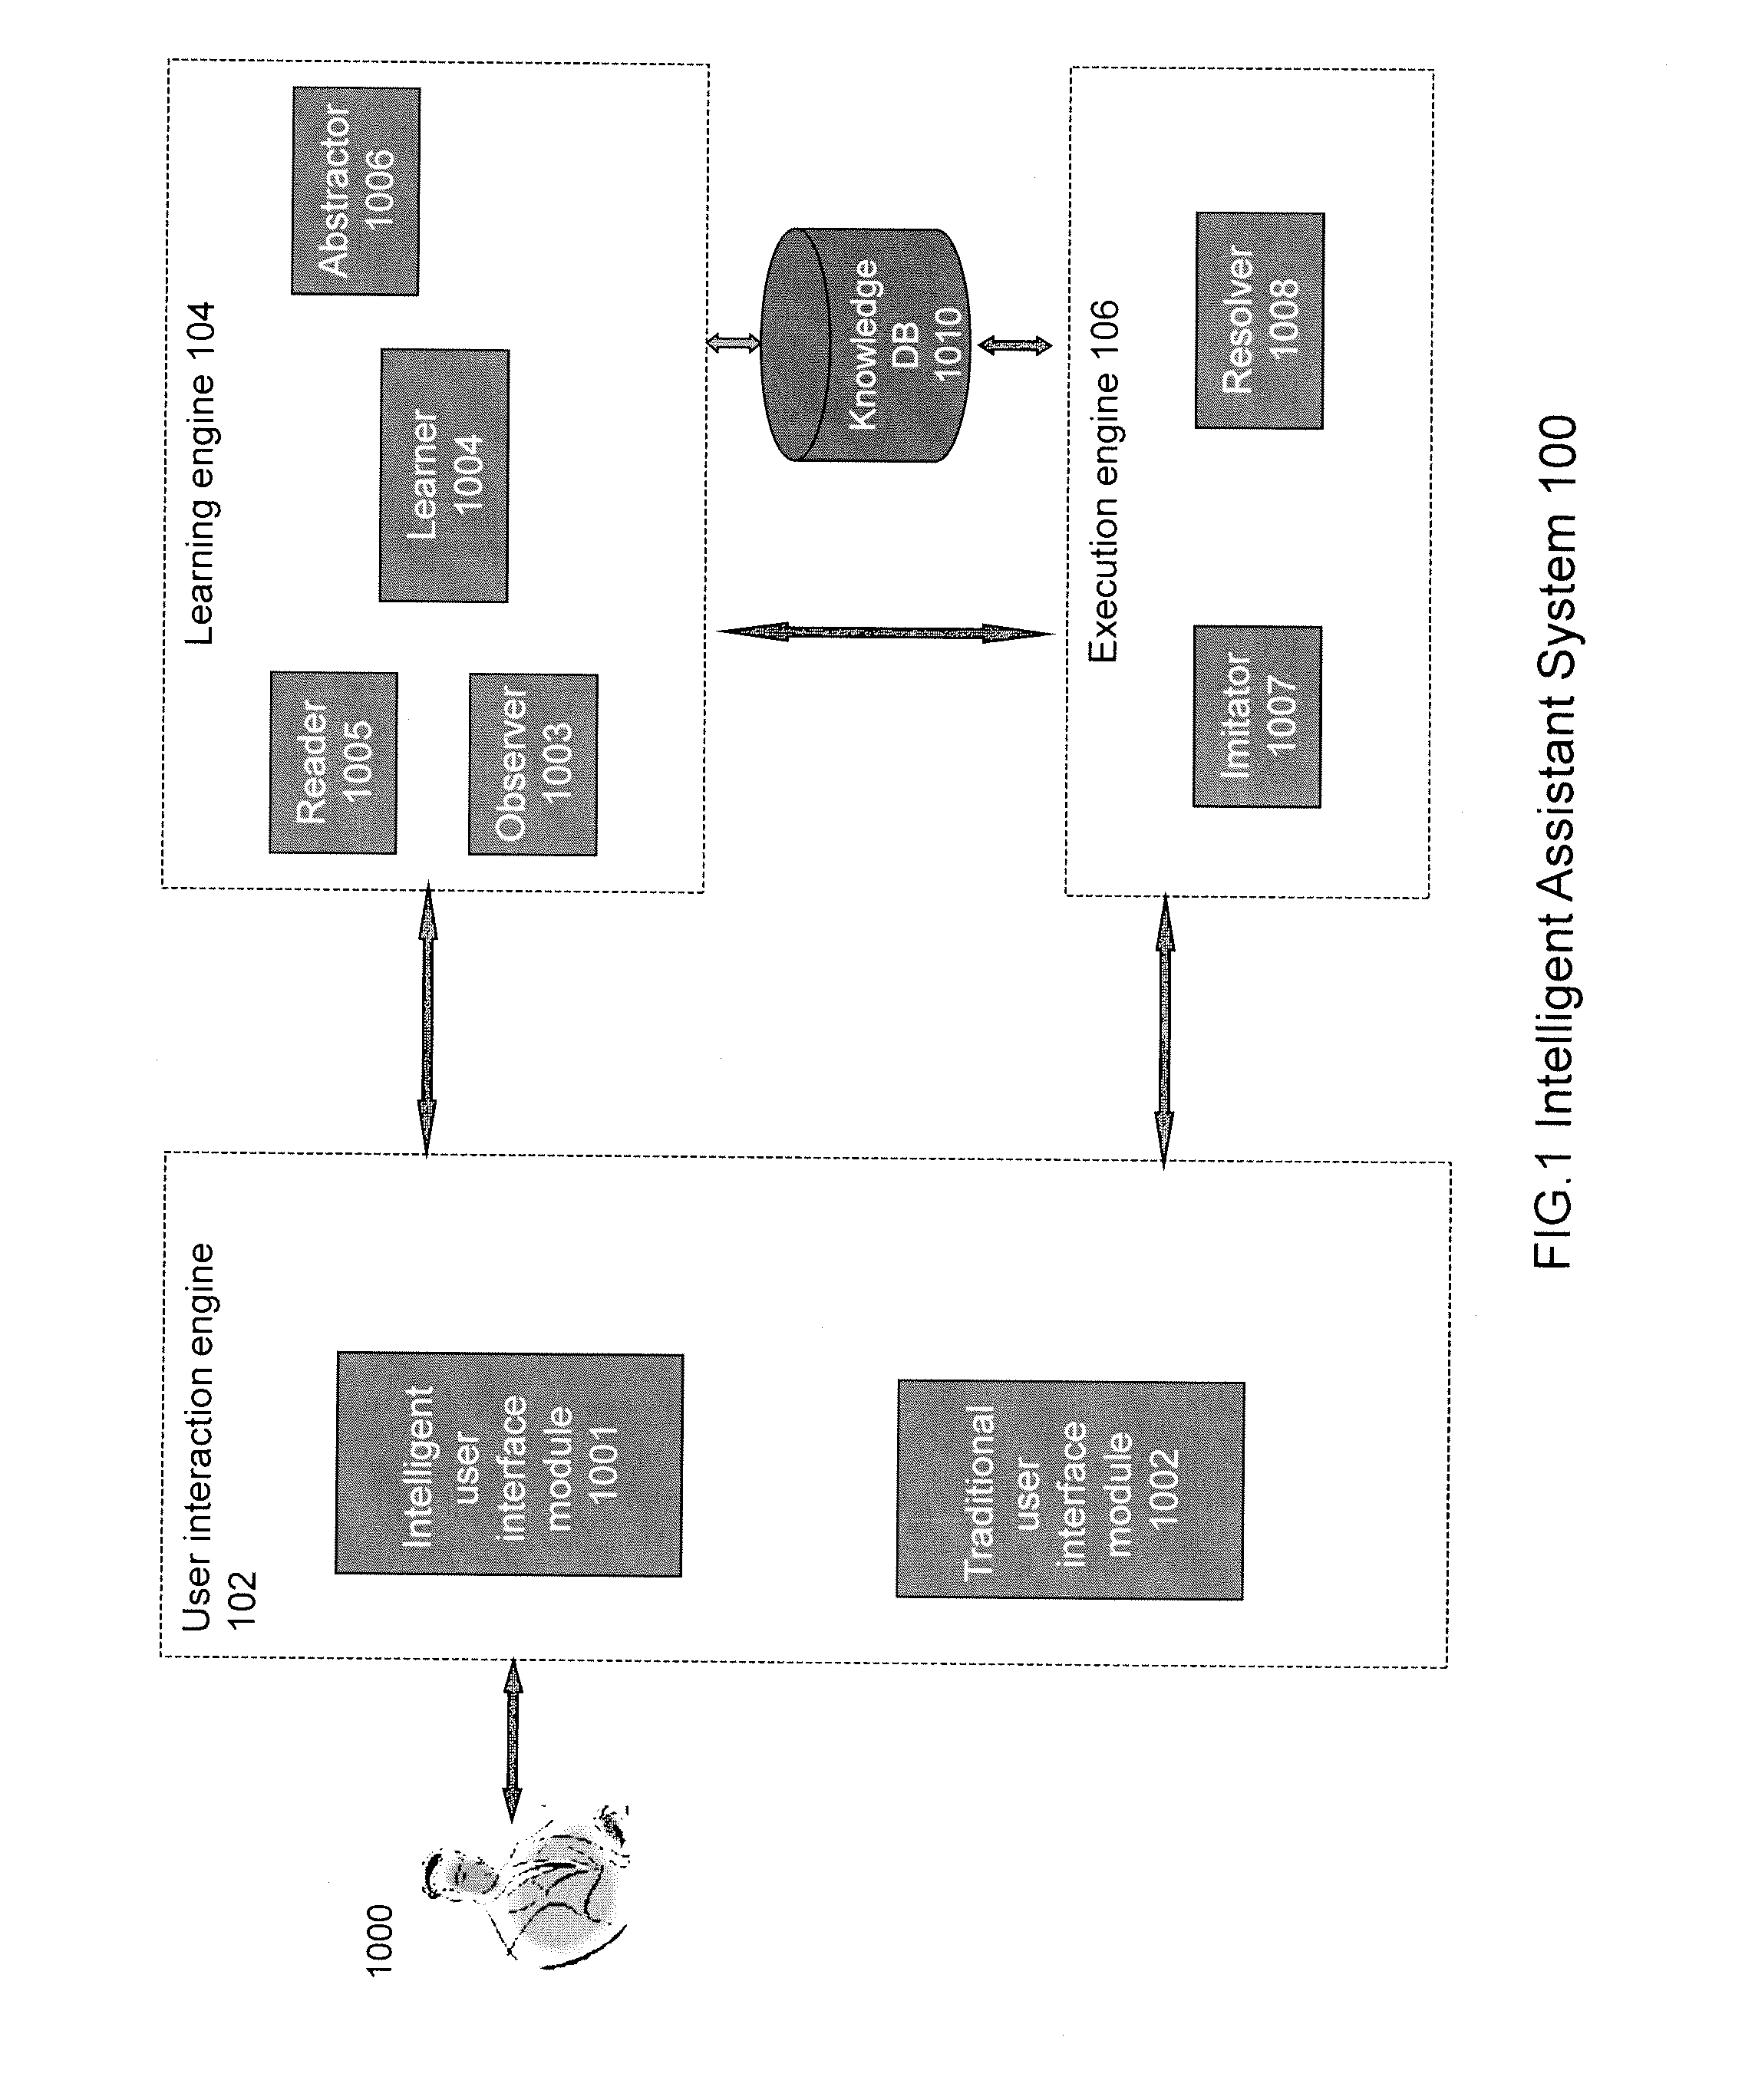 Systems and methods for building a universal intelligent assistant with learning capabilities